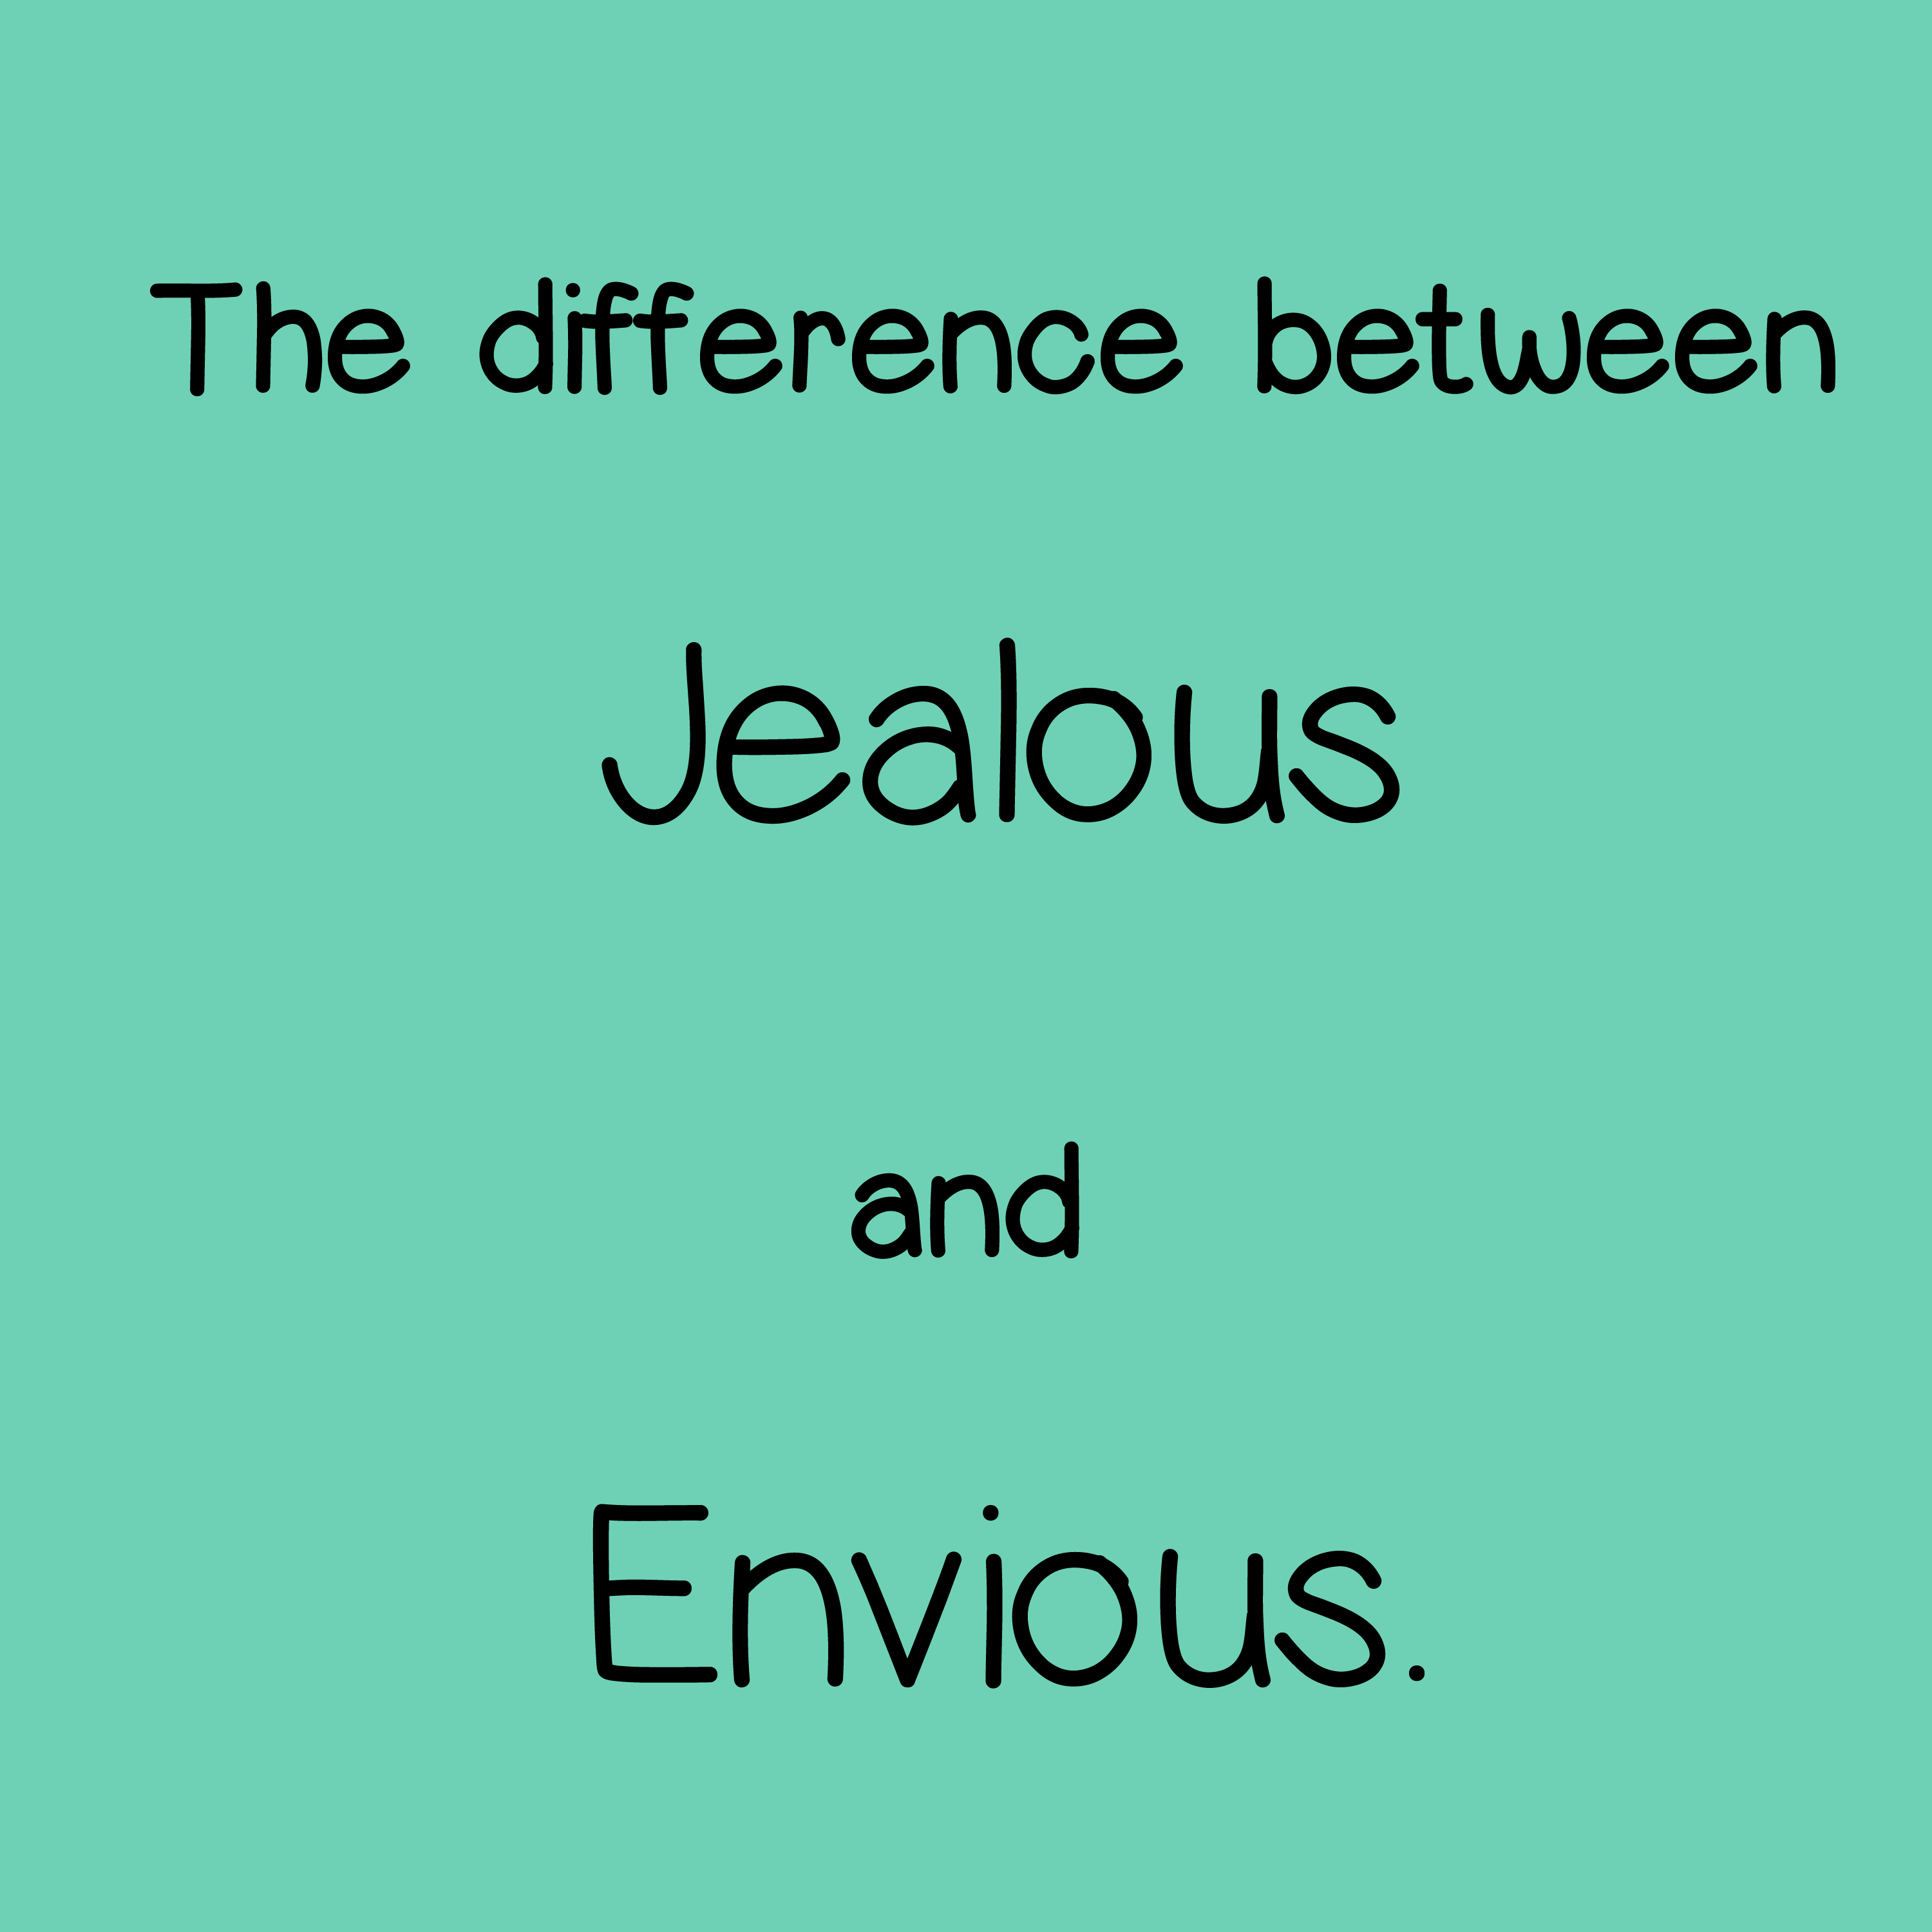 The difference between jealous and envious